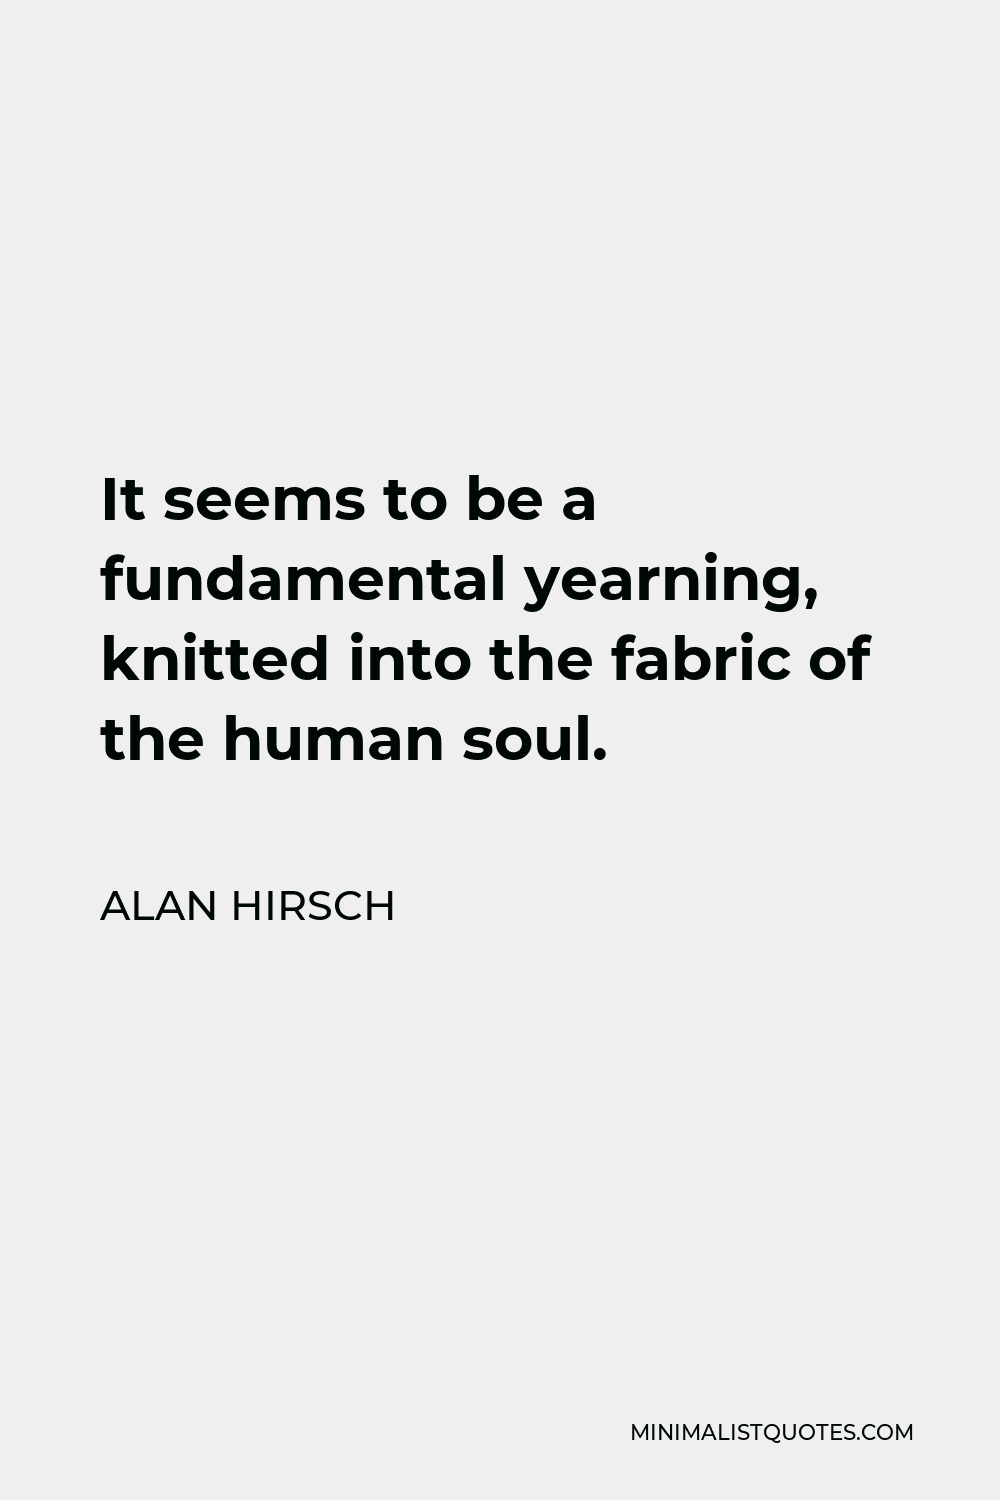 Alan Hirsch Quote - It seems to be a fundamental yearning, knitted into the fabric of the human soul.